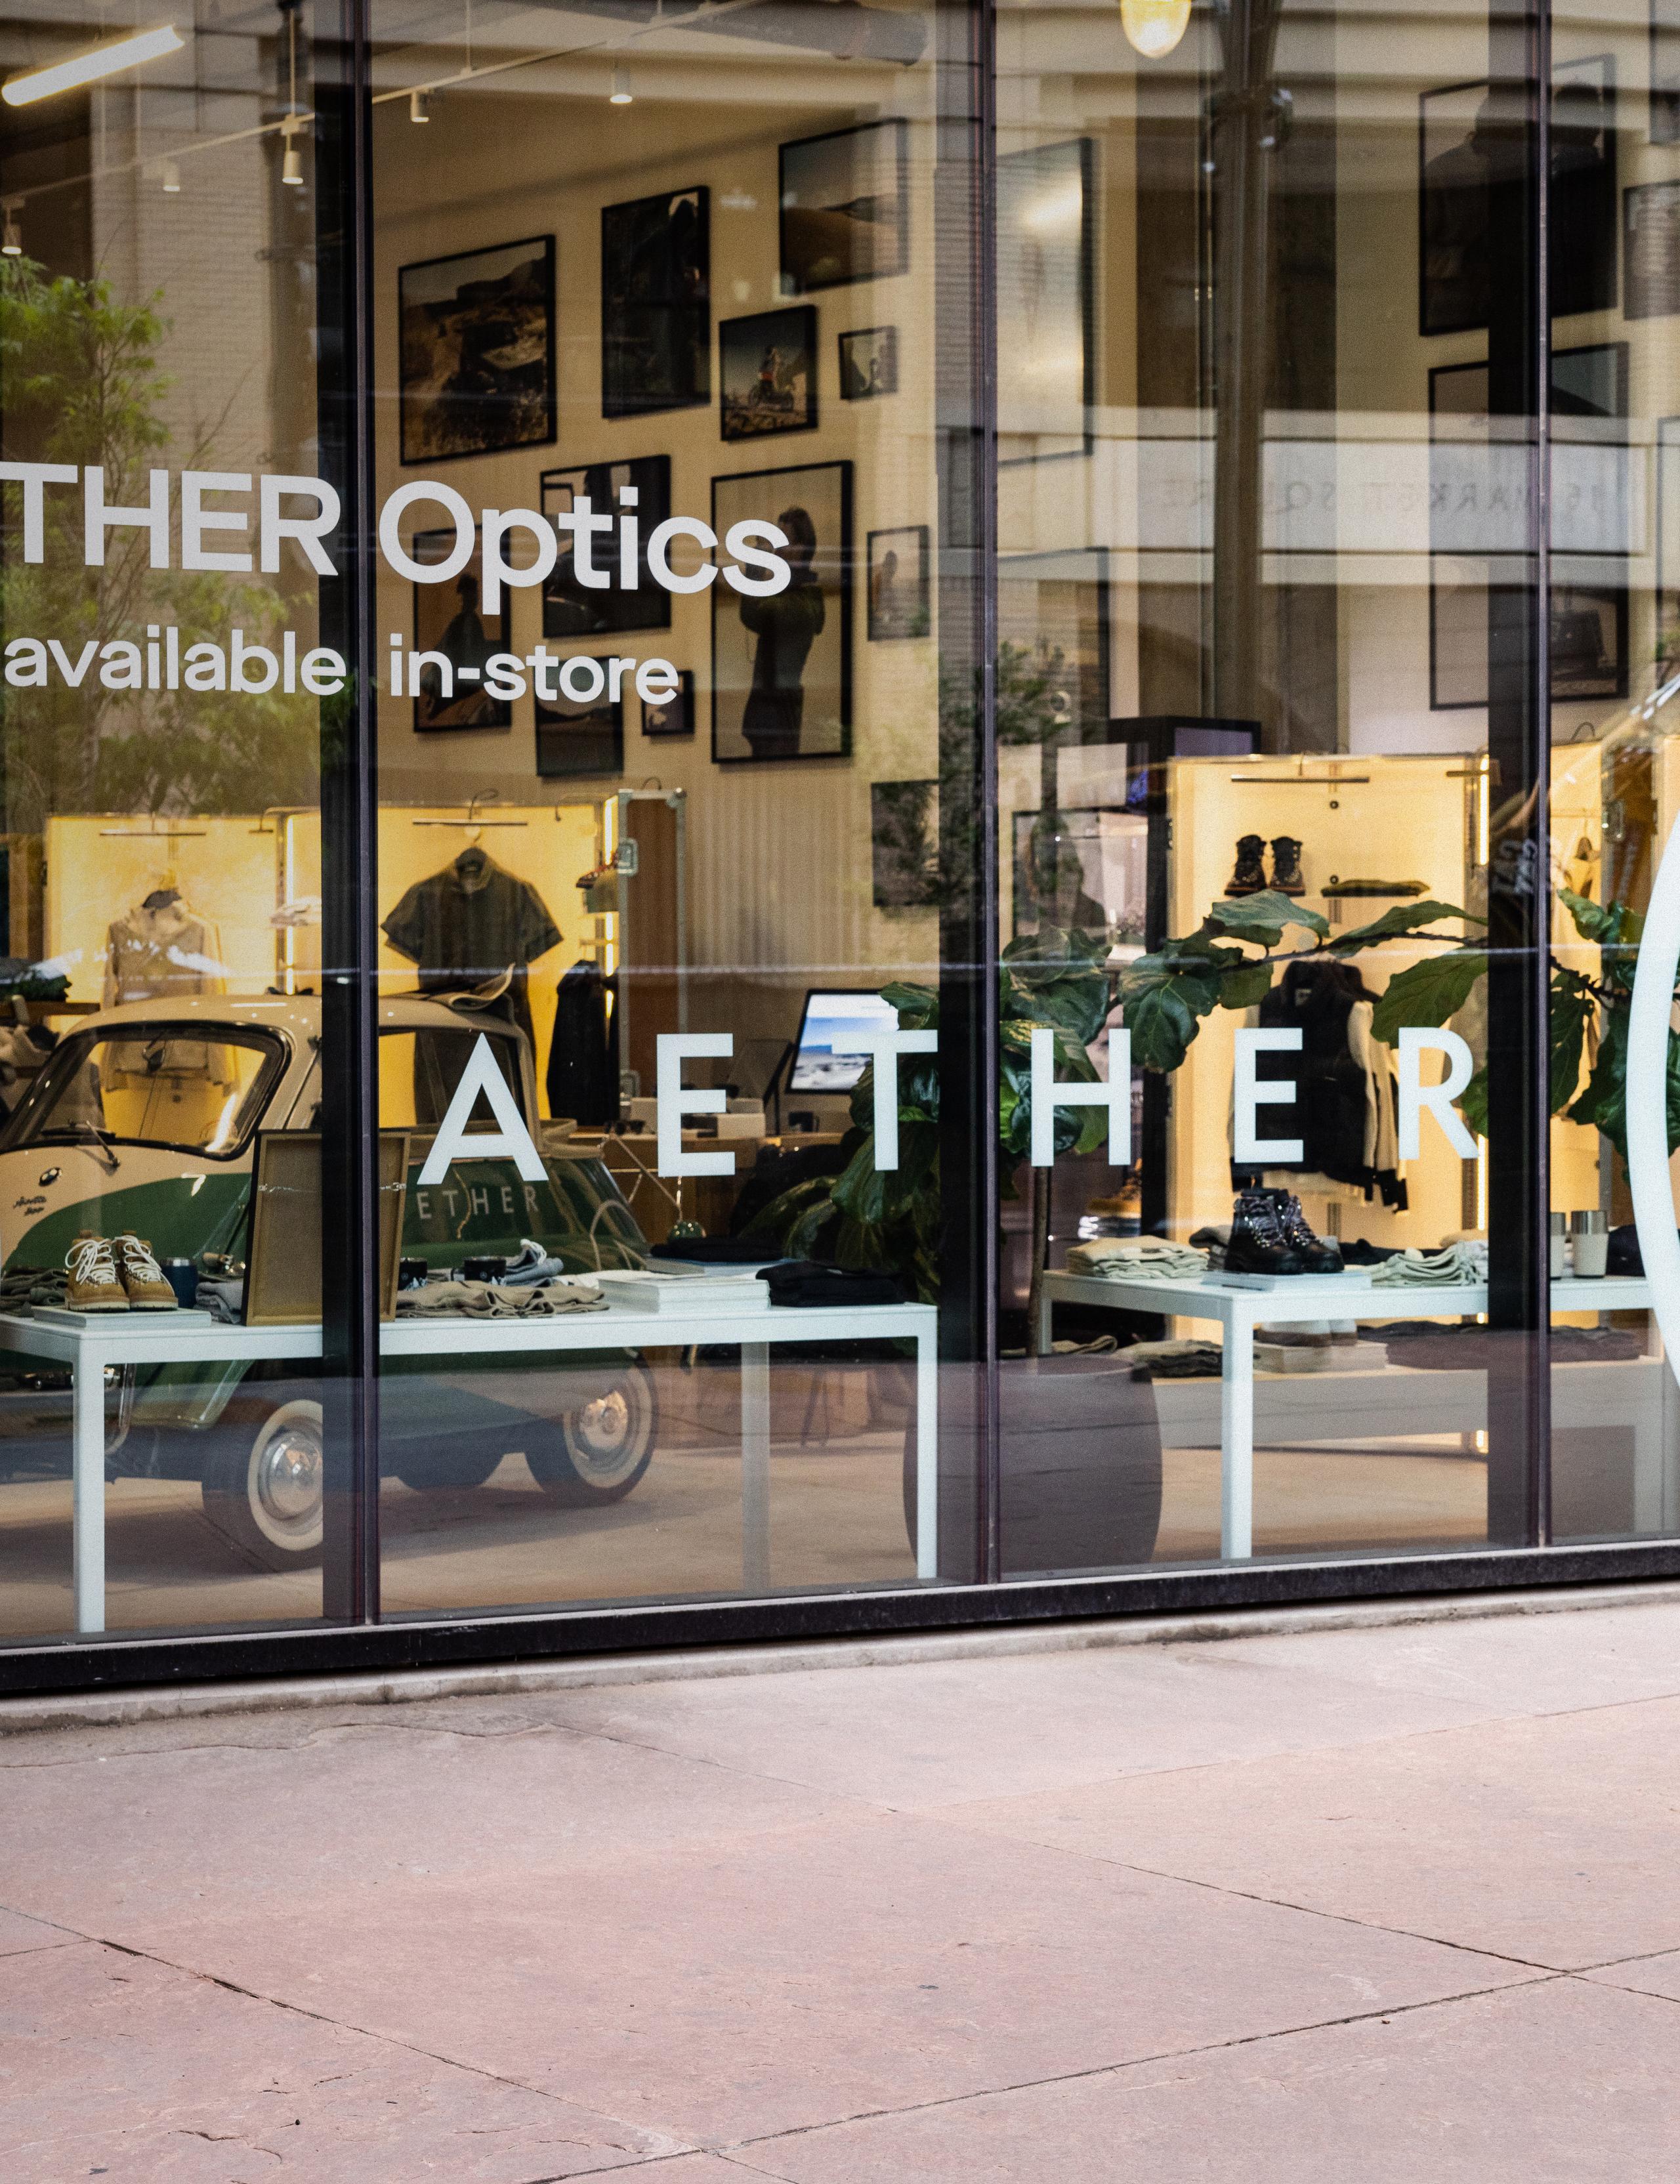 Exterior view of AETHER store with large glass facade